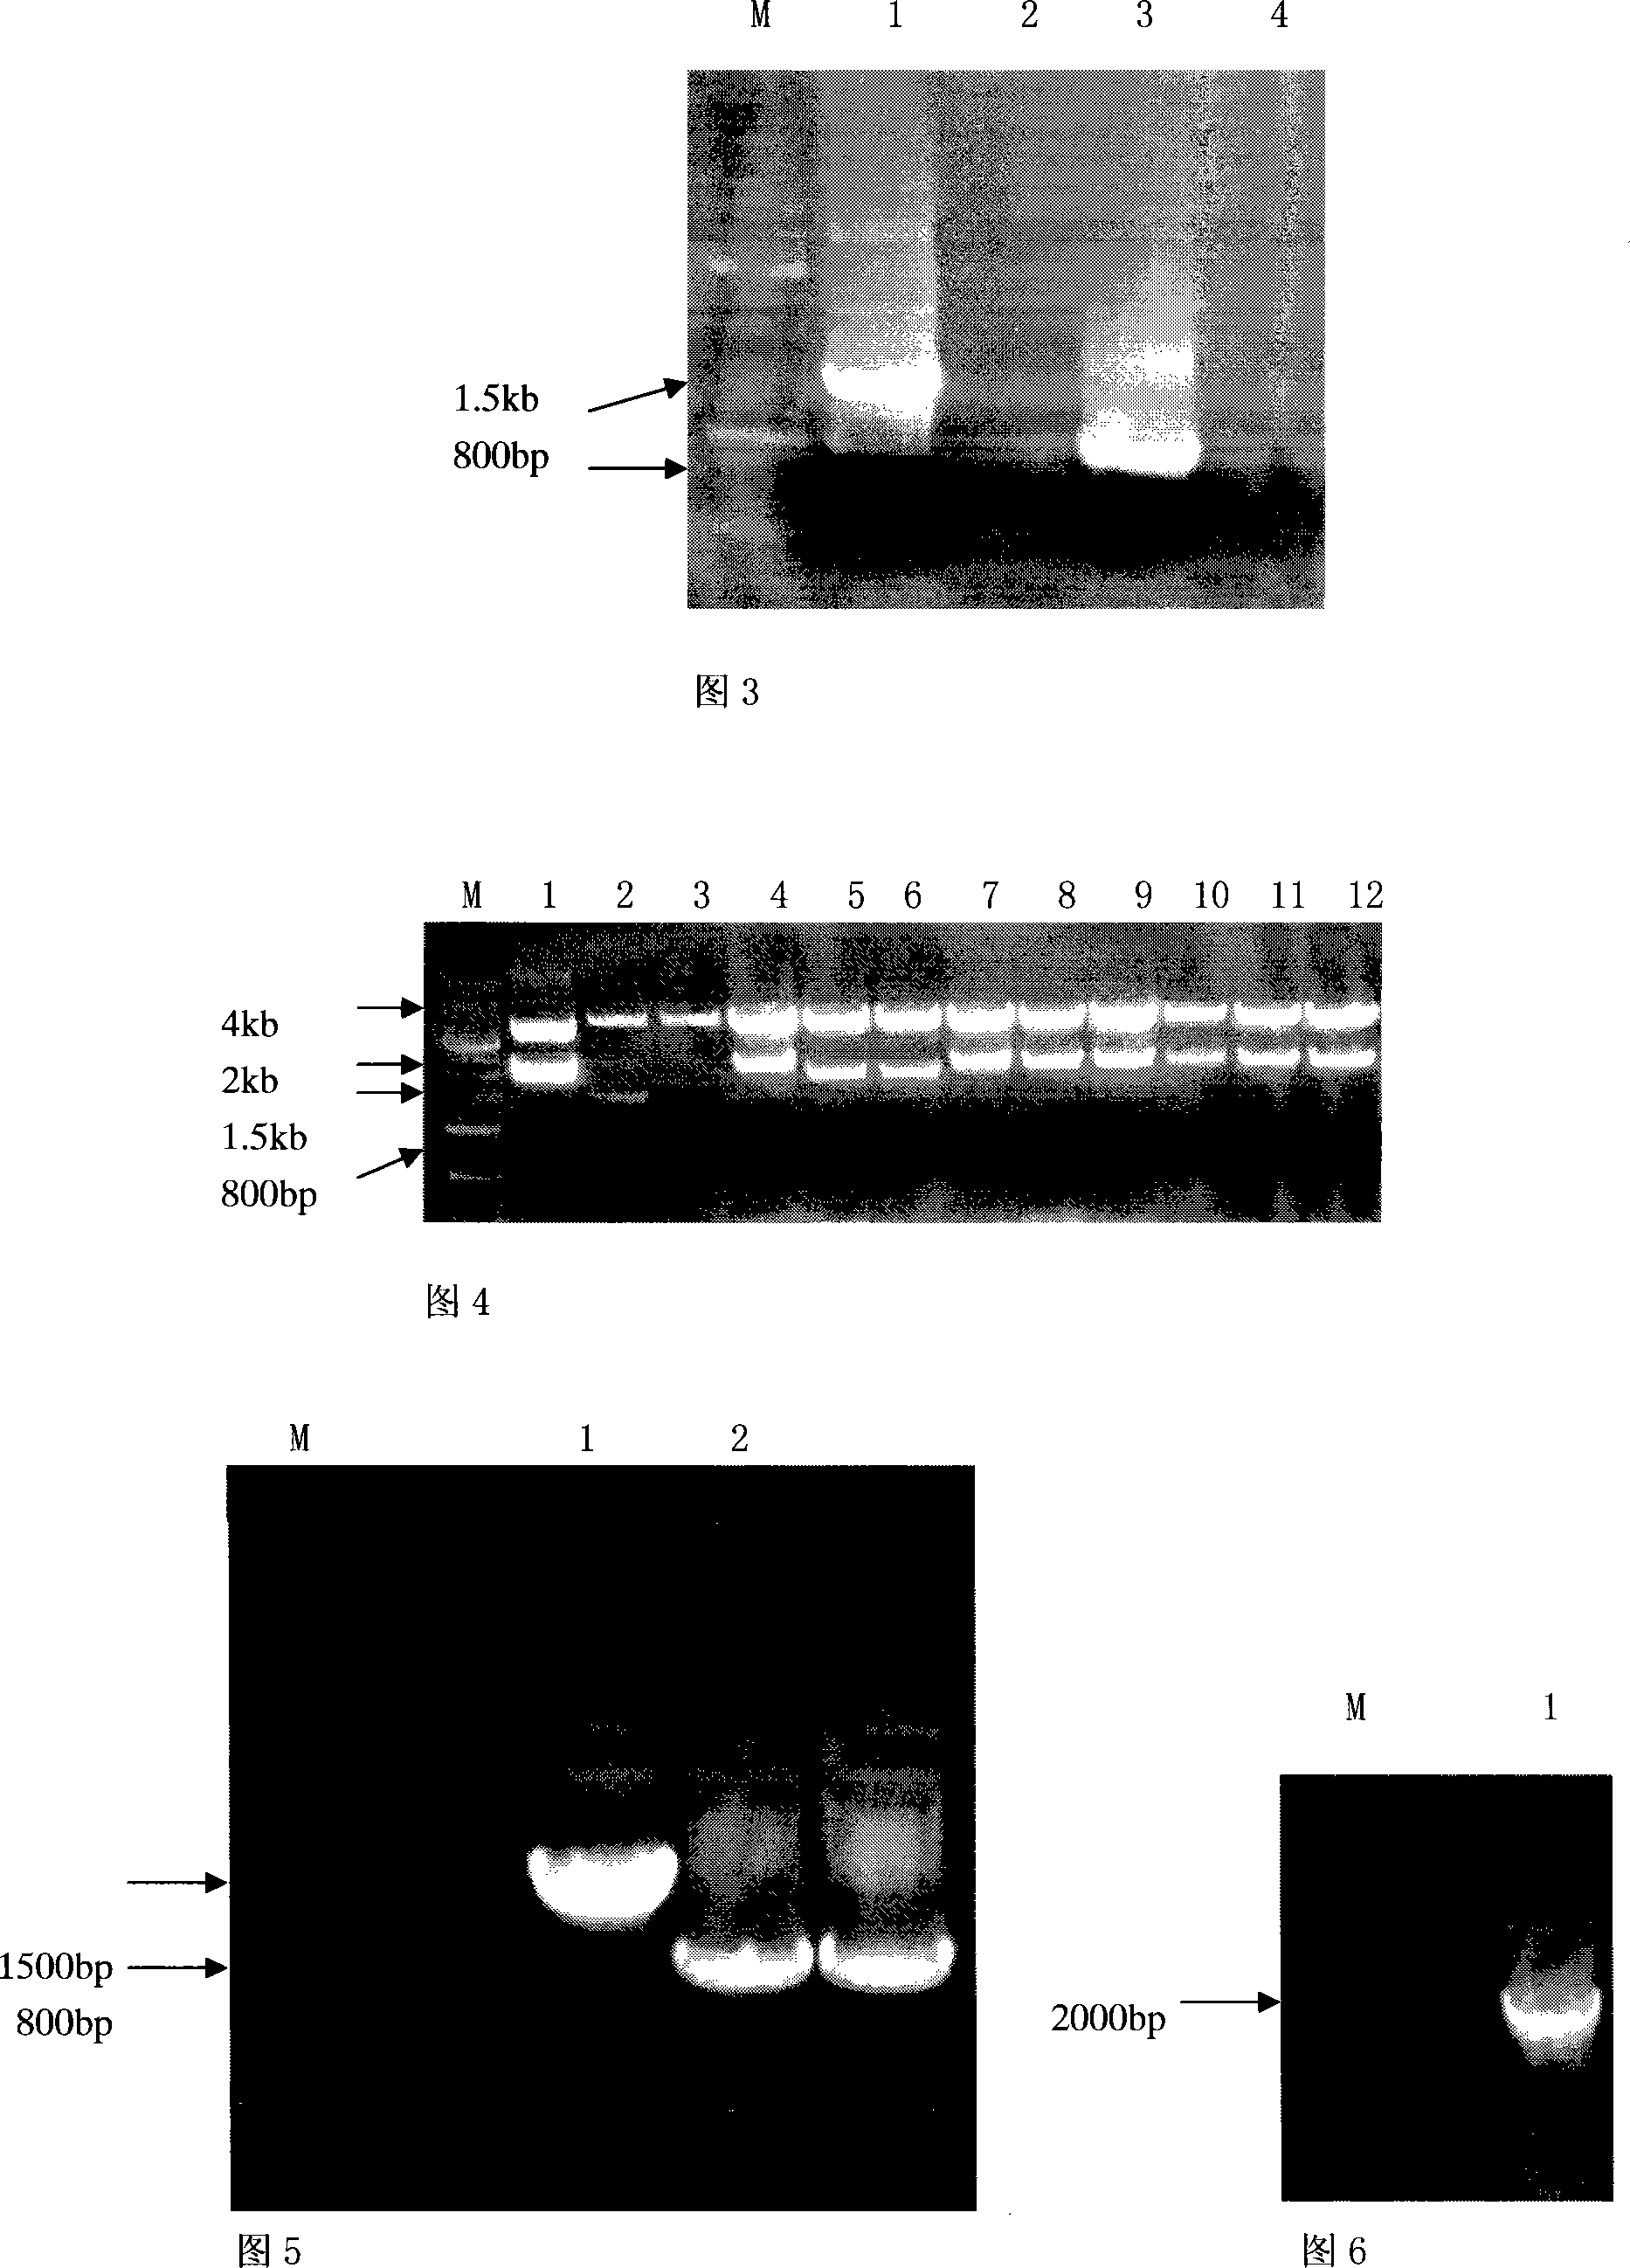 Gene of containing 26S rRNA sequence from restoring line of cotton